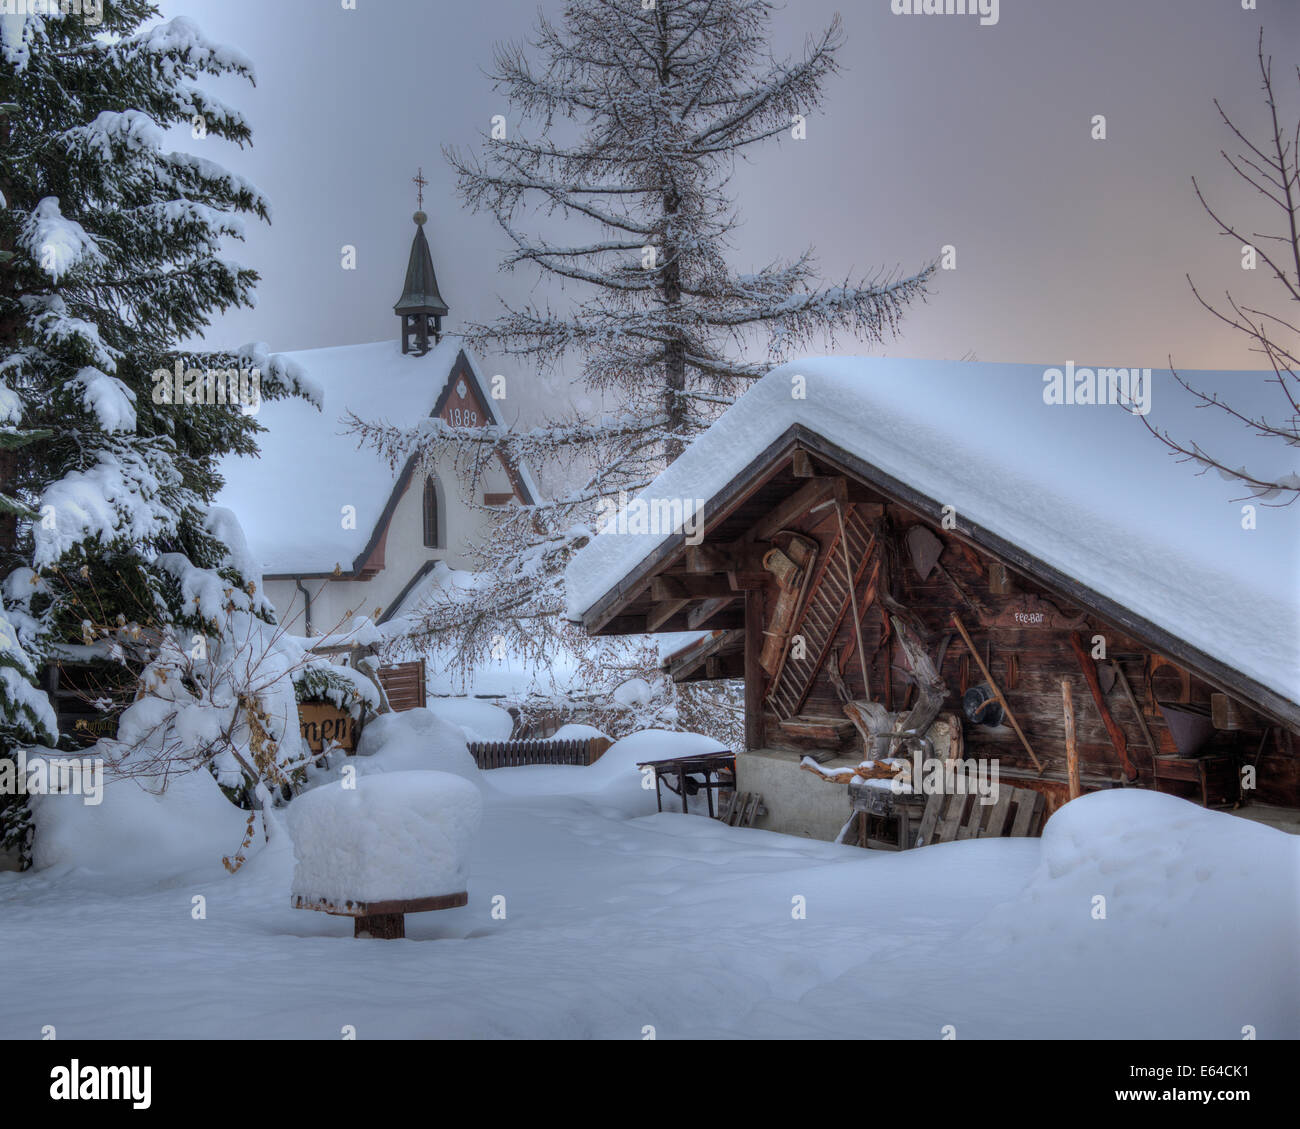 Snow covered house and chapel in the Swiss Alpine village of Saas-Fee Stock Photo